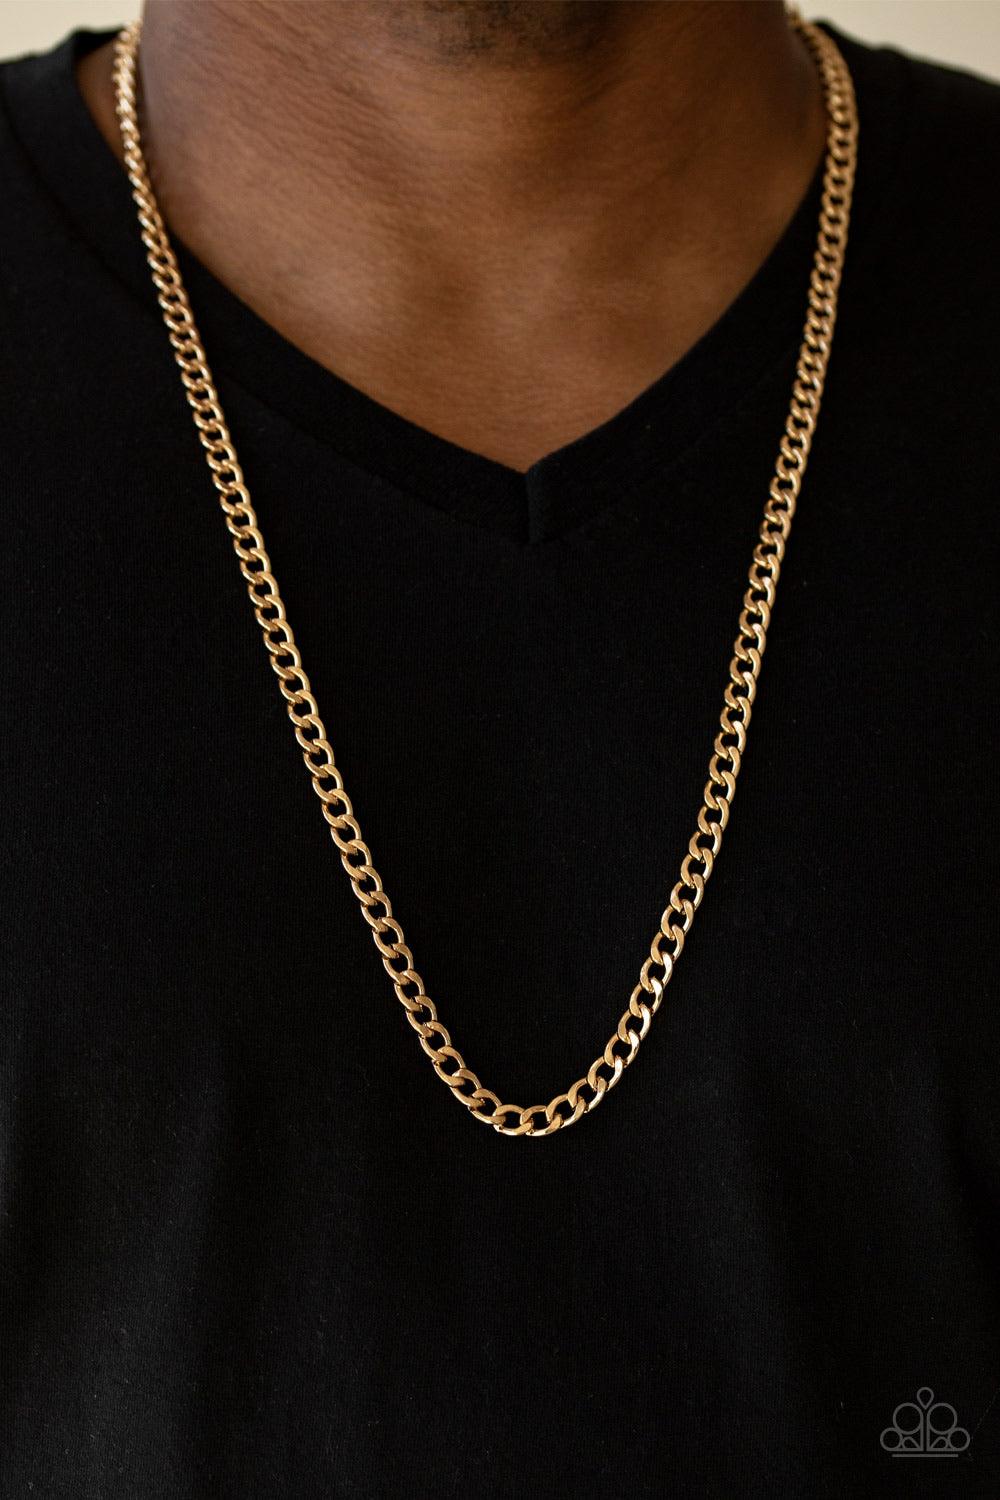 Paparazzi Accessories Delta - Gold Featuring classic curb chain, a thick gold chain drapes across the chest for a sleek, upscale look. Features an adjustable clasp closure. Jewelry